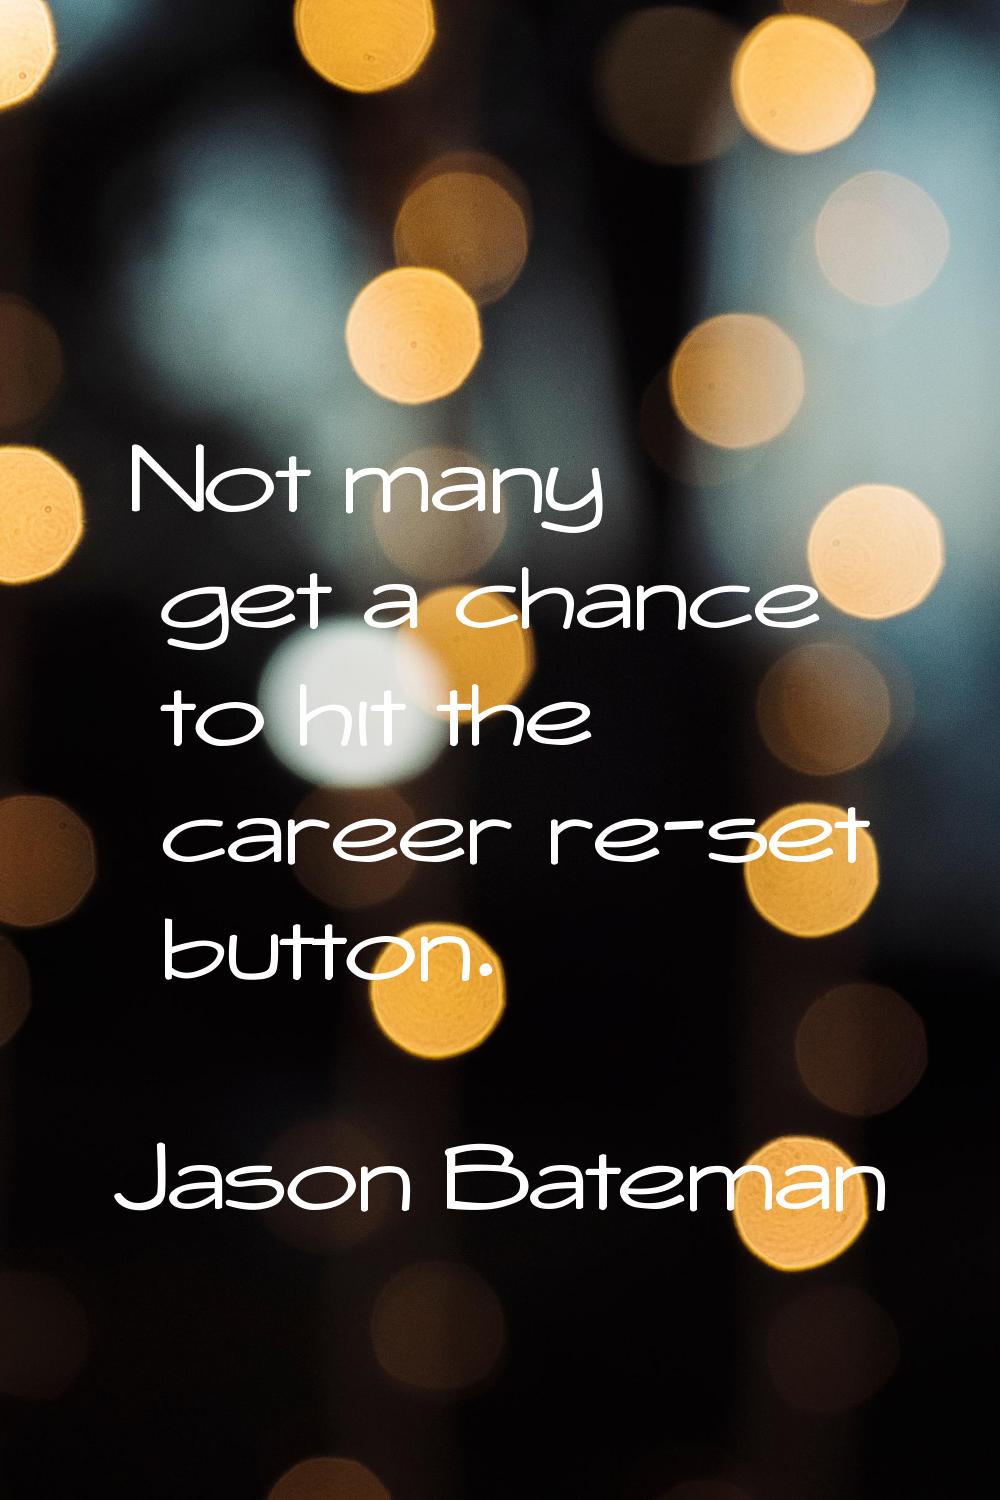 Not many get a chance to hit the career re-set button.